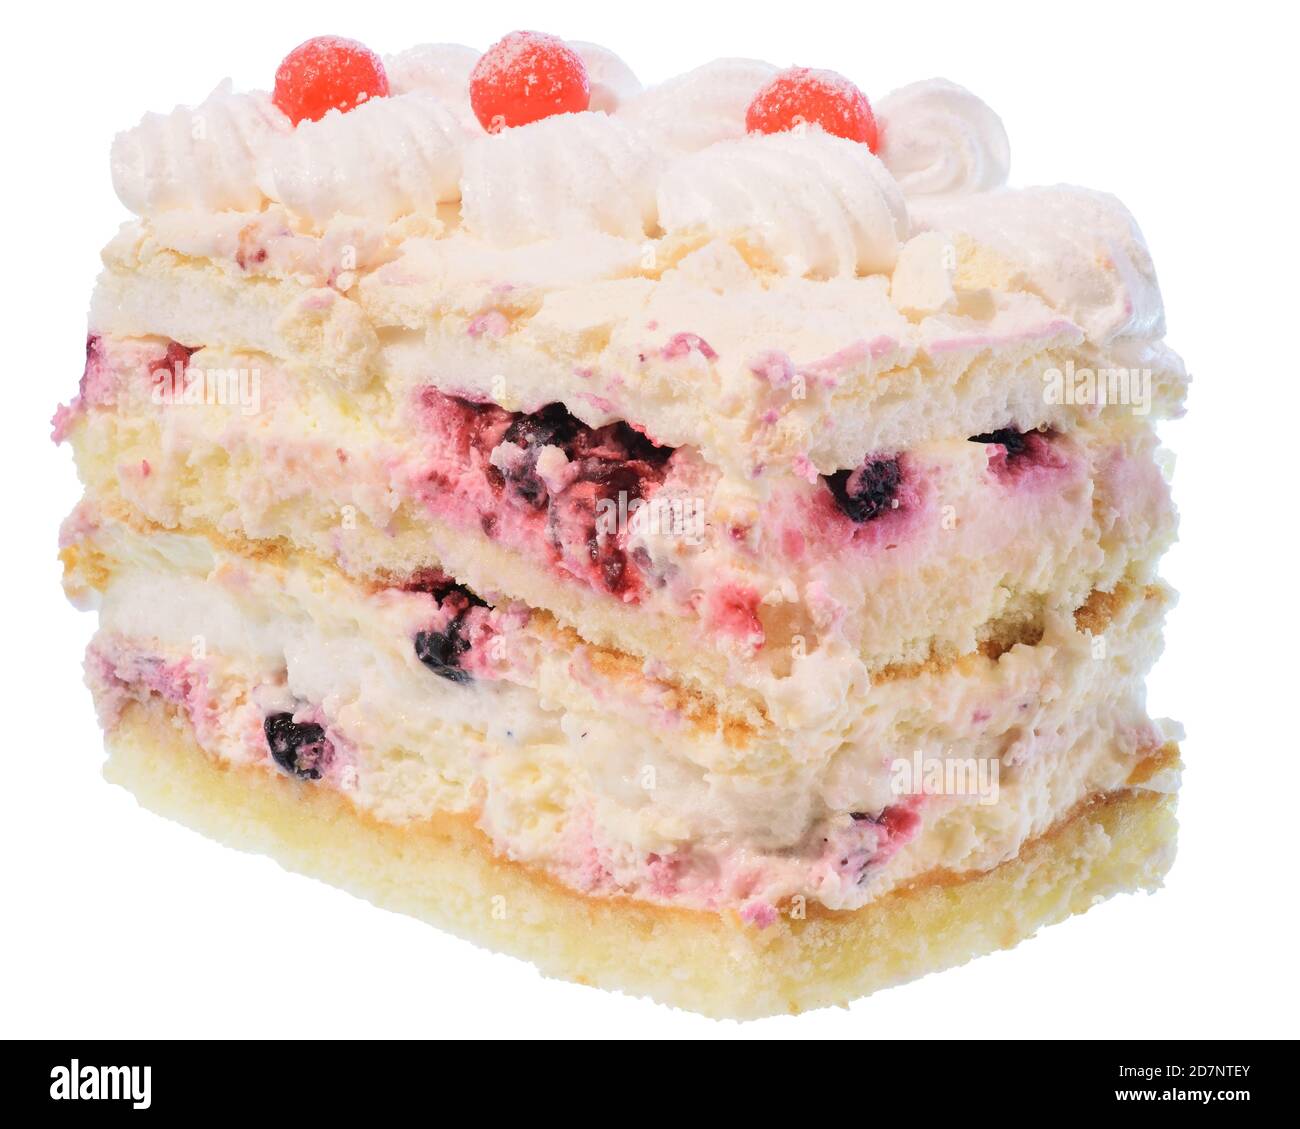 Cake with cream and blueberries isolated on a white background. Stock Photo